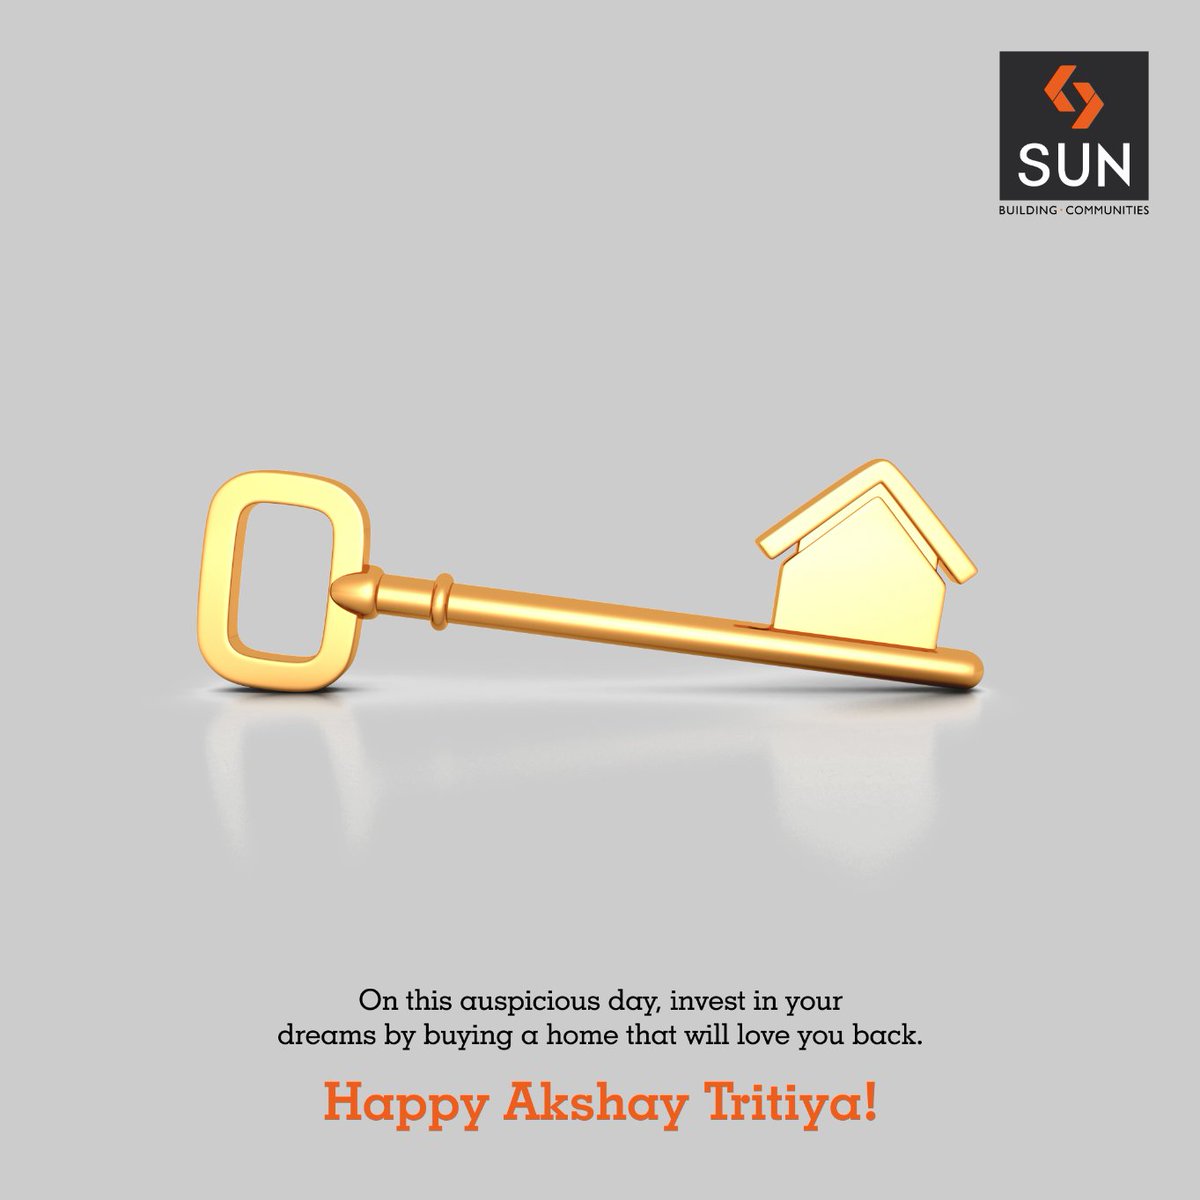 May this auspicious day bring prosperity and luck in your home.
Happy #AkshayTritiya to all! https://t.co/xKesAKXHtO